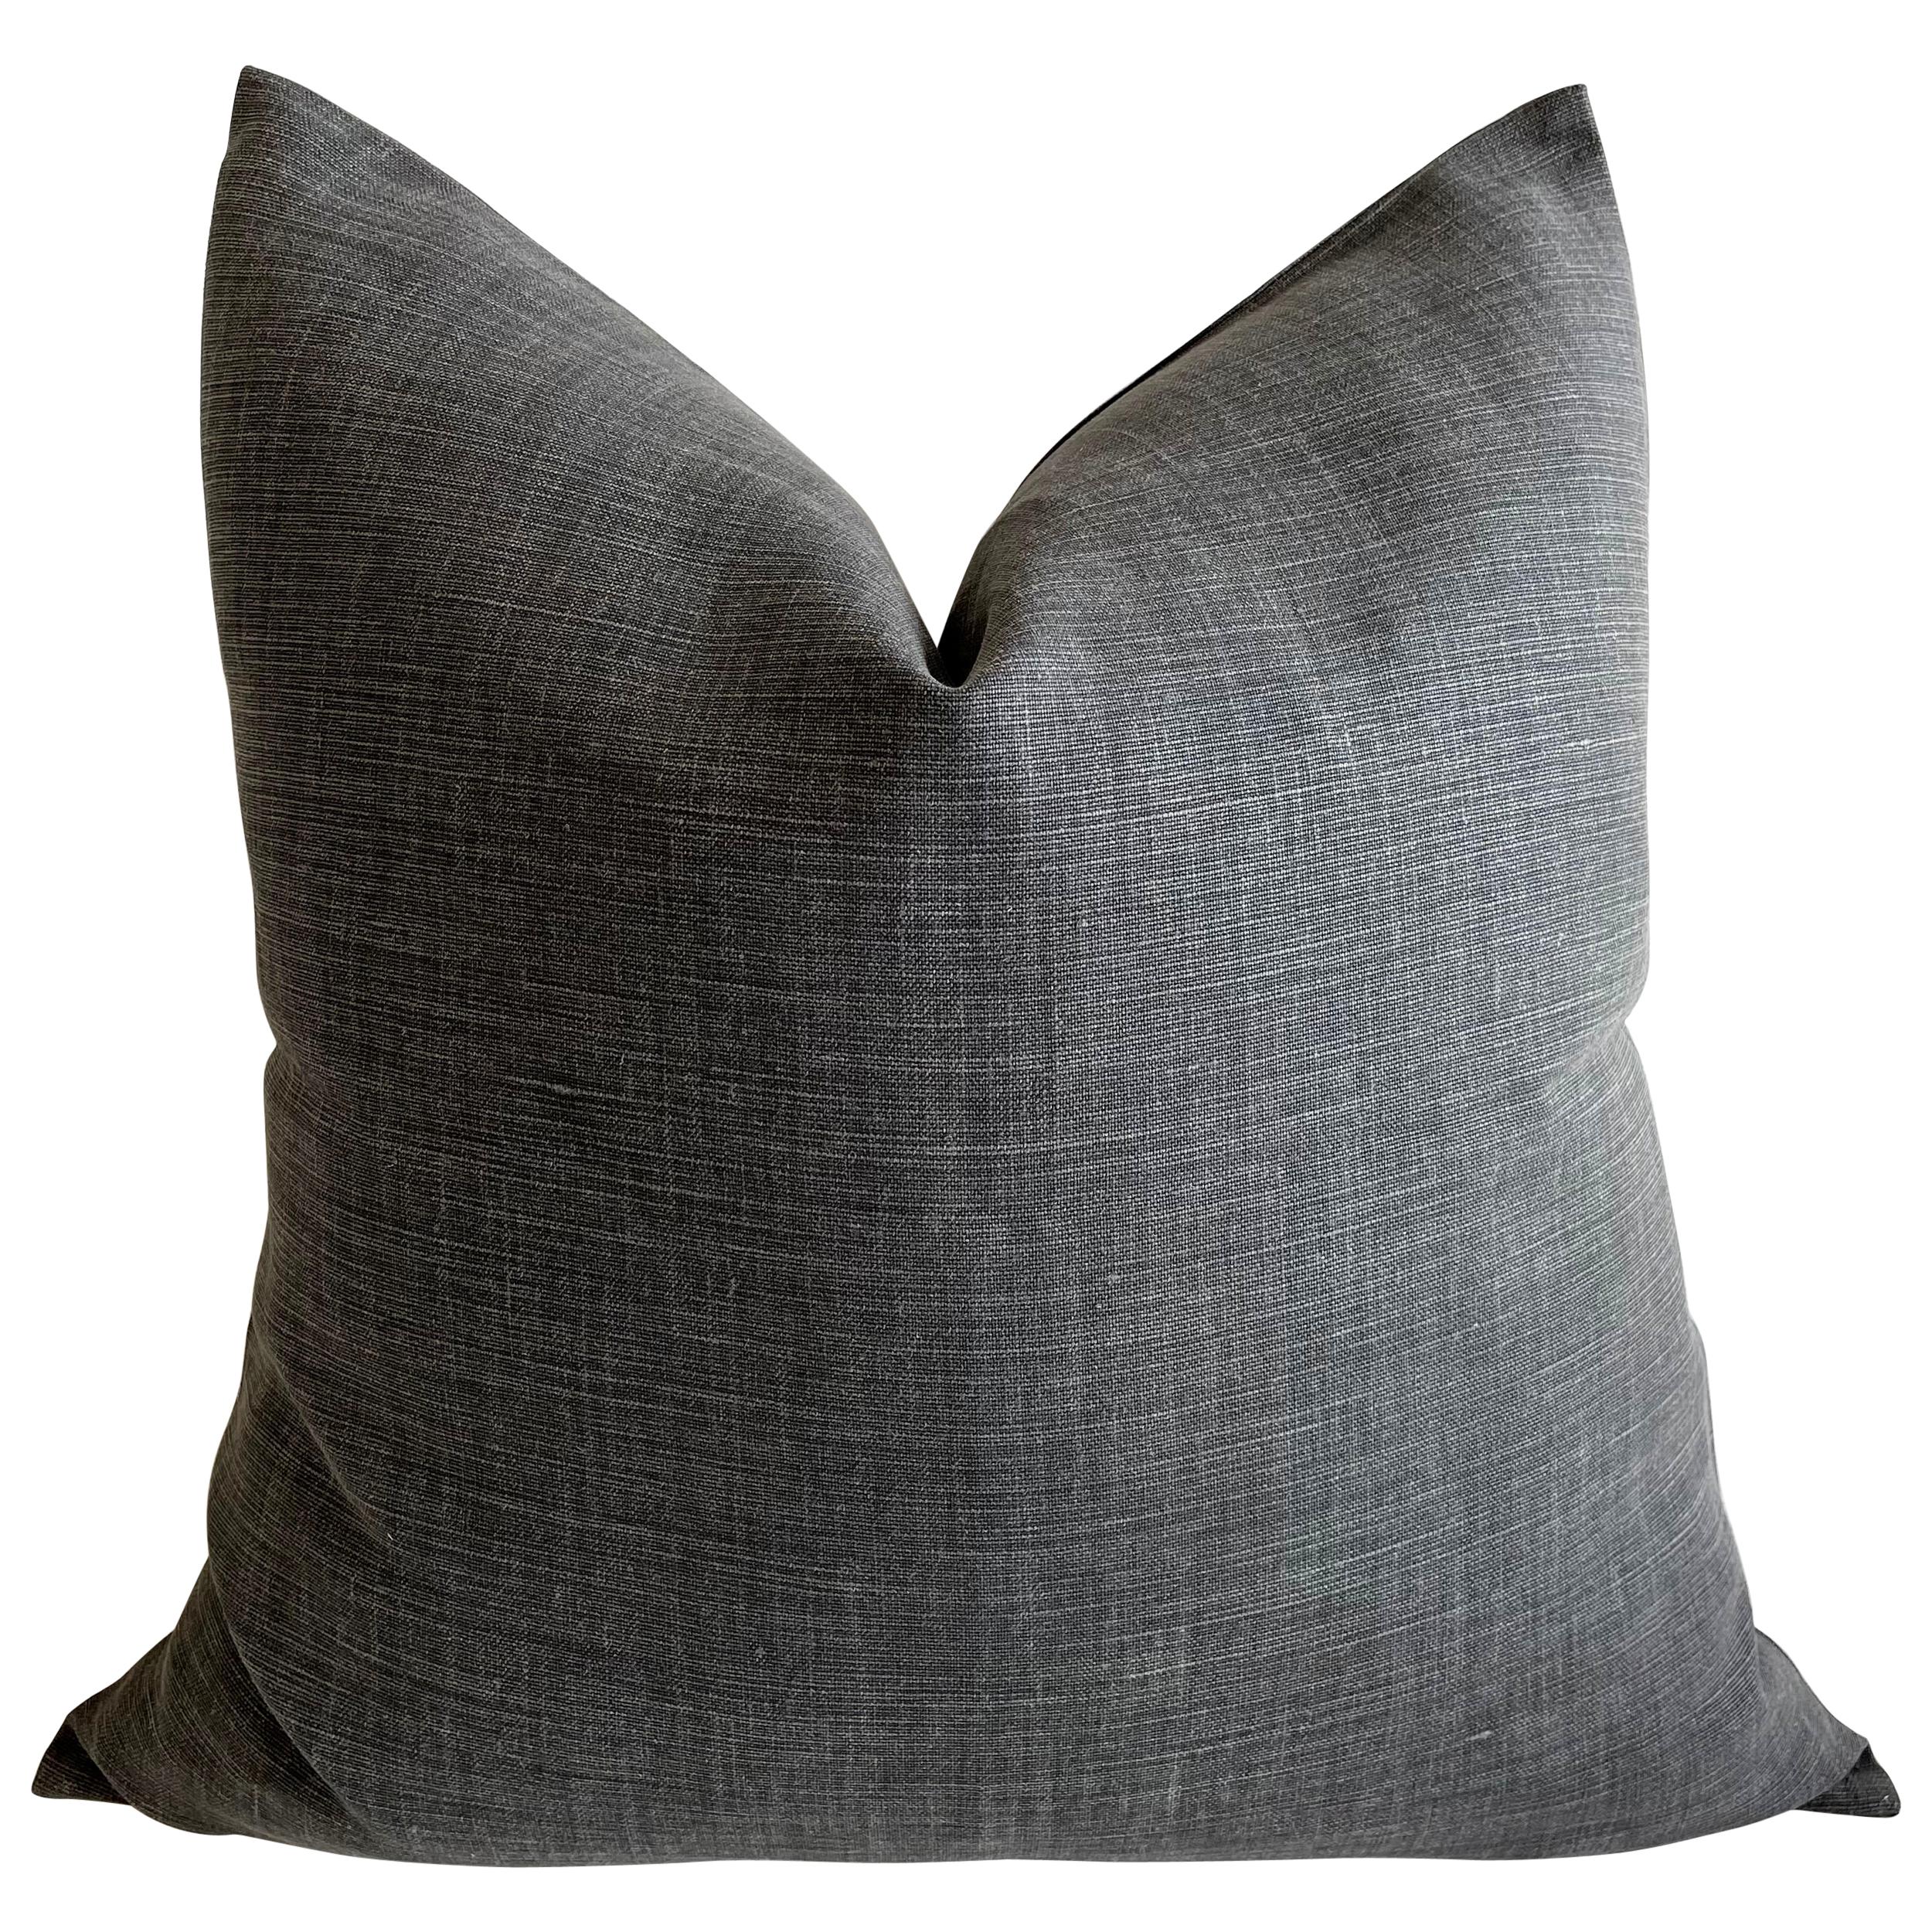 https://a.1stdibscdn.com/stone-washed-faded-black-belgian-linen-accent-pillow-for-sale/1121189/f_230019721616239088404/23001972_master.jpg